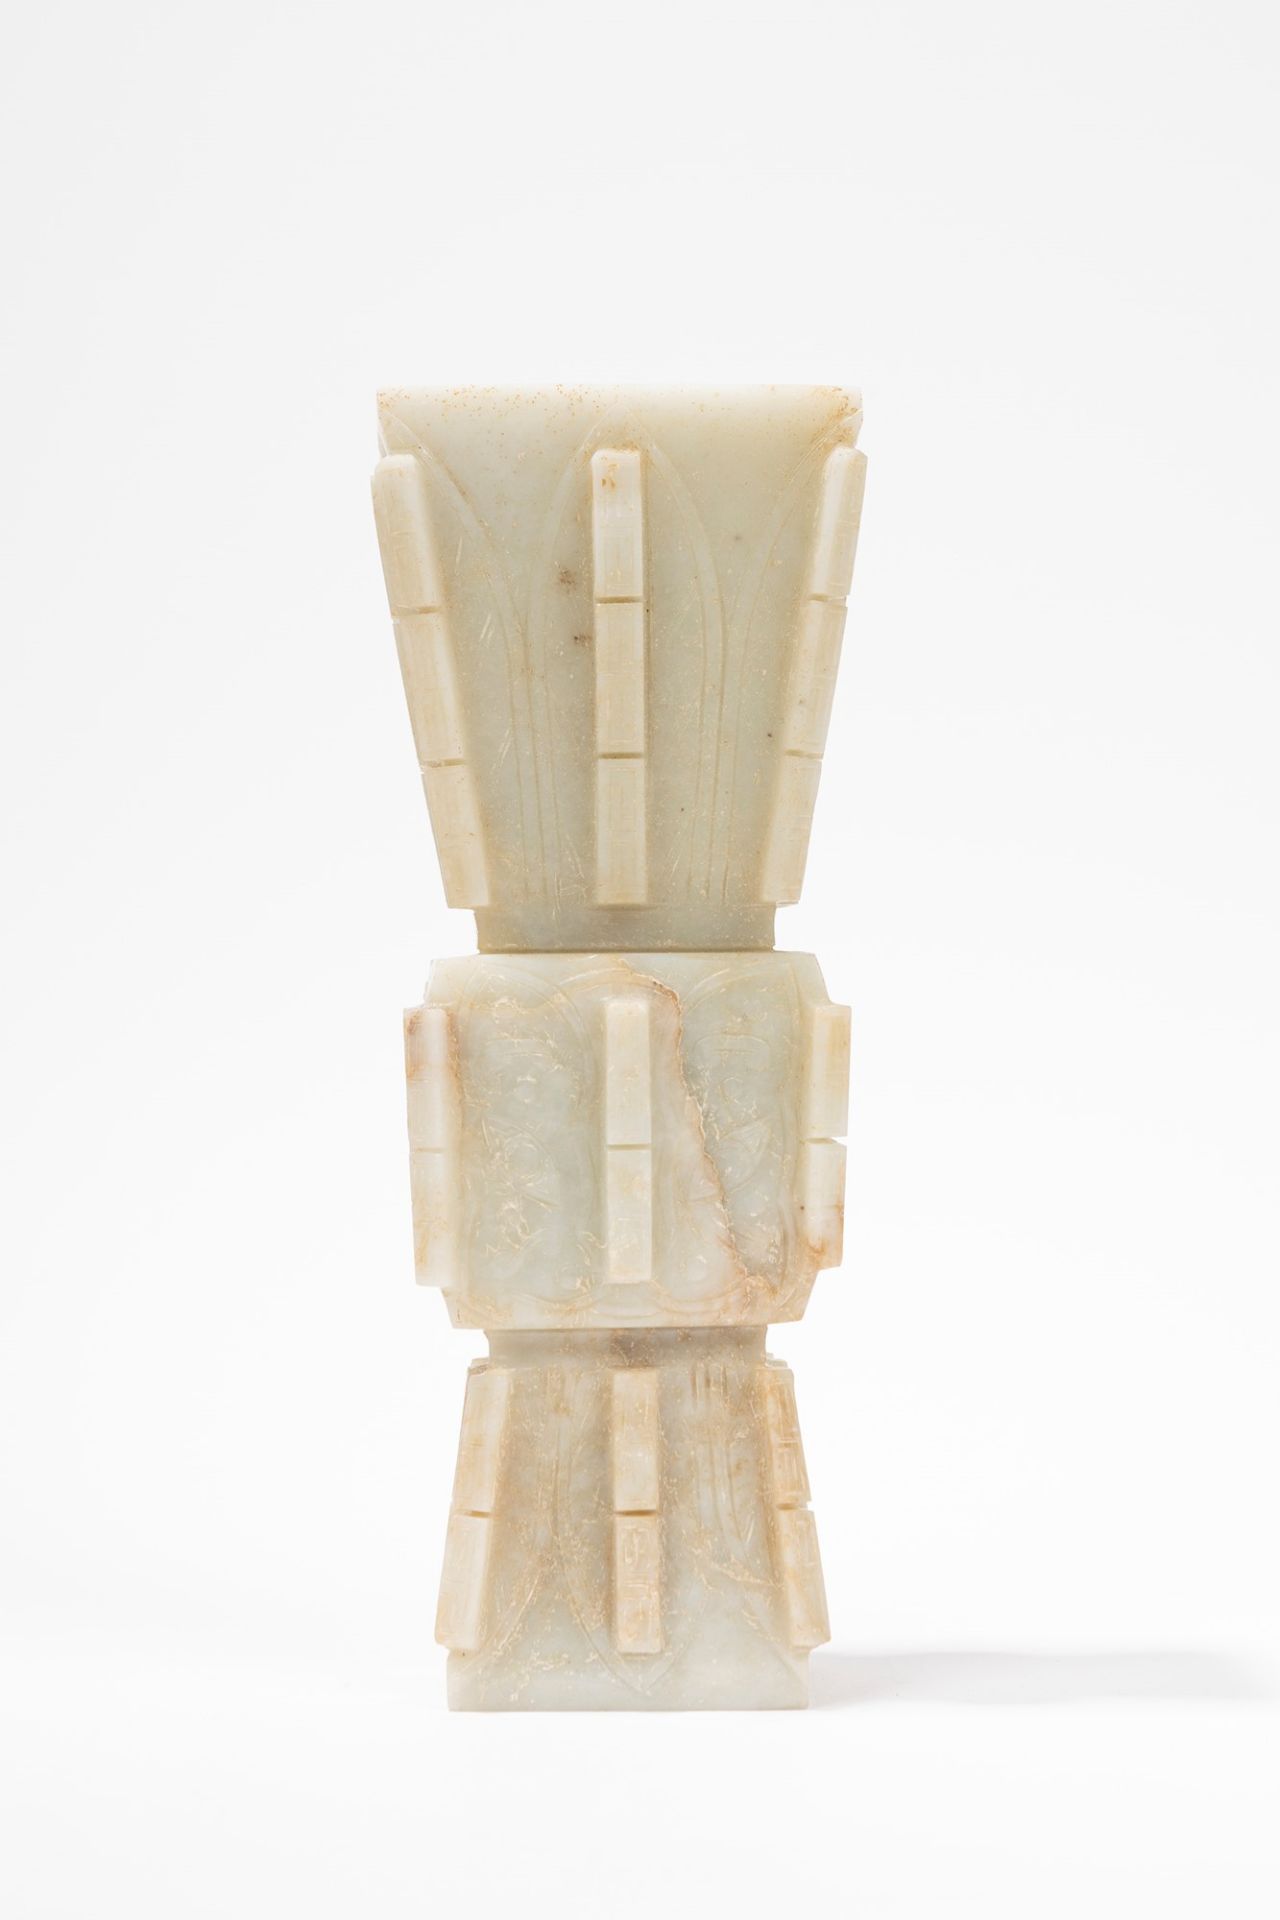 AN ARCHAISTIC MOTTLED WHITE JADE ZUN FORM VASE, China, Ming Dynasty, 17th century